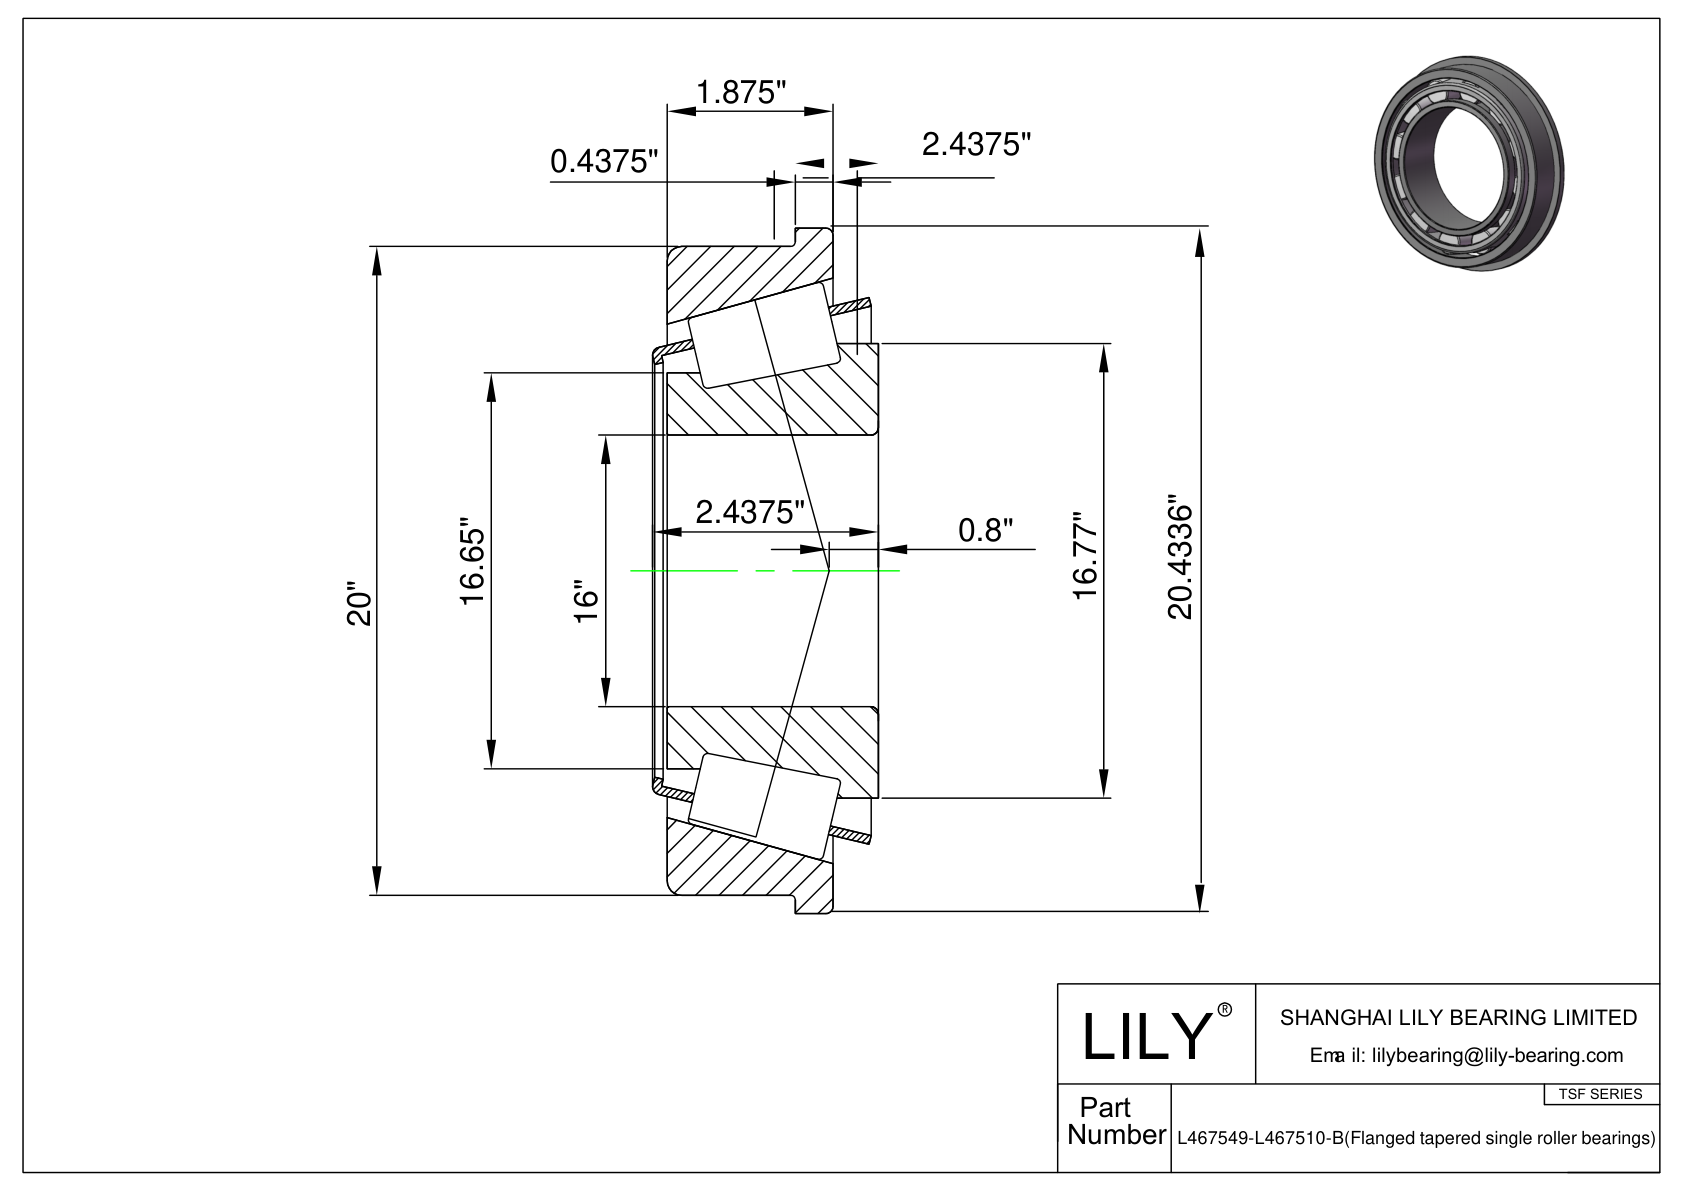 L467549-L467510-B TSF (Tapered Single Roller Bearings with Flange) (Imperial) cad drawing